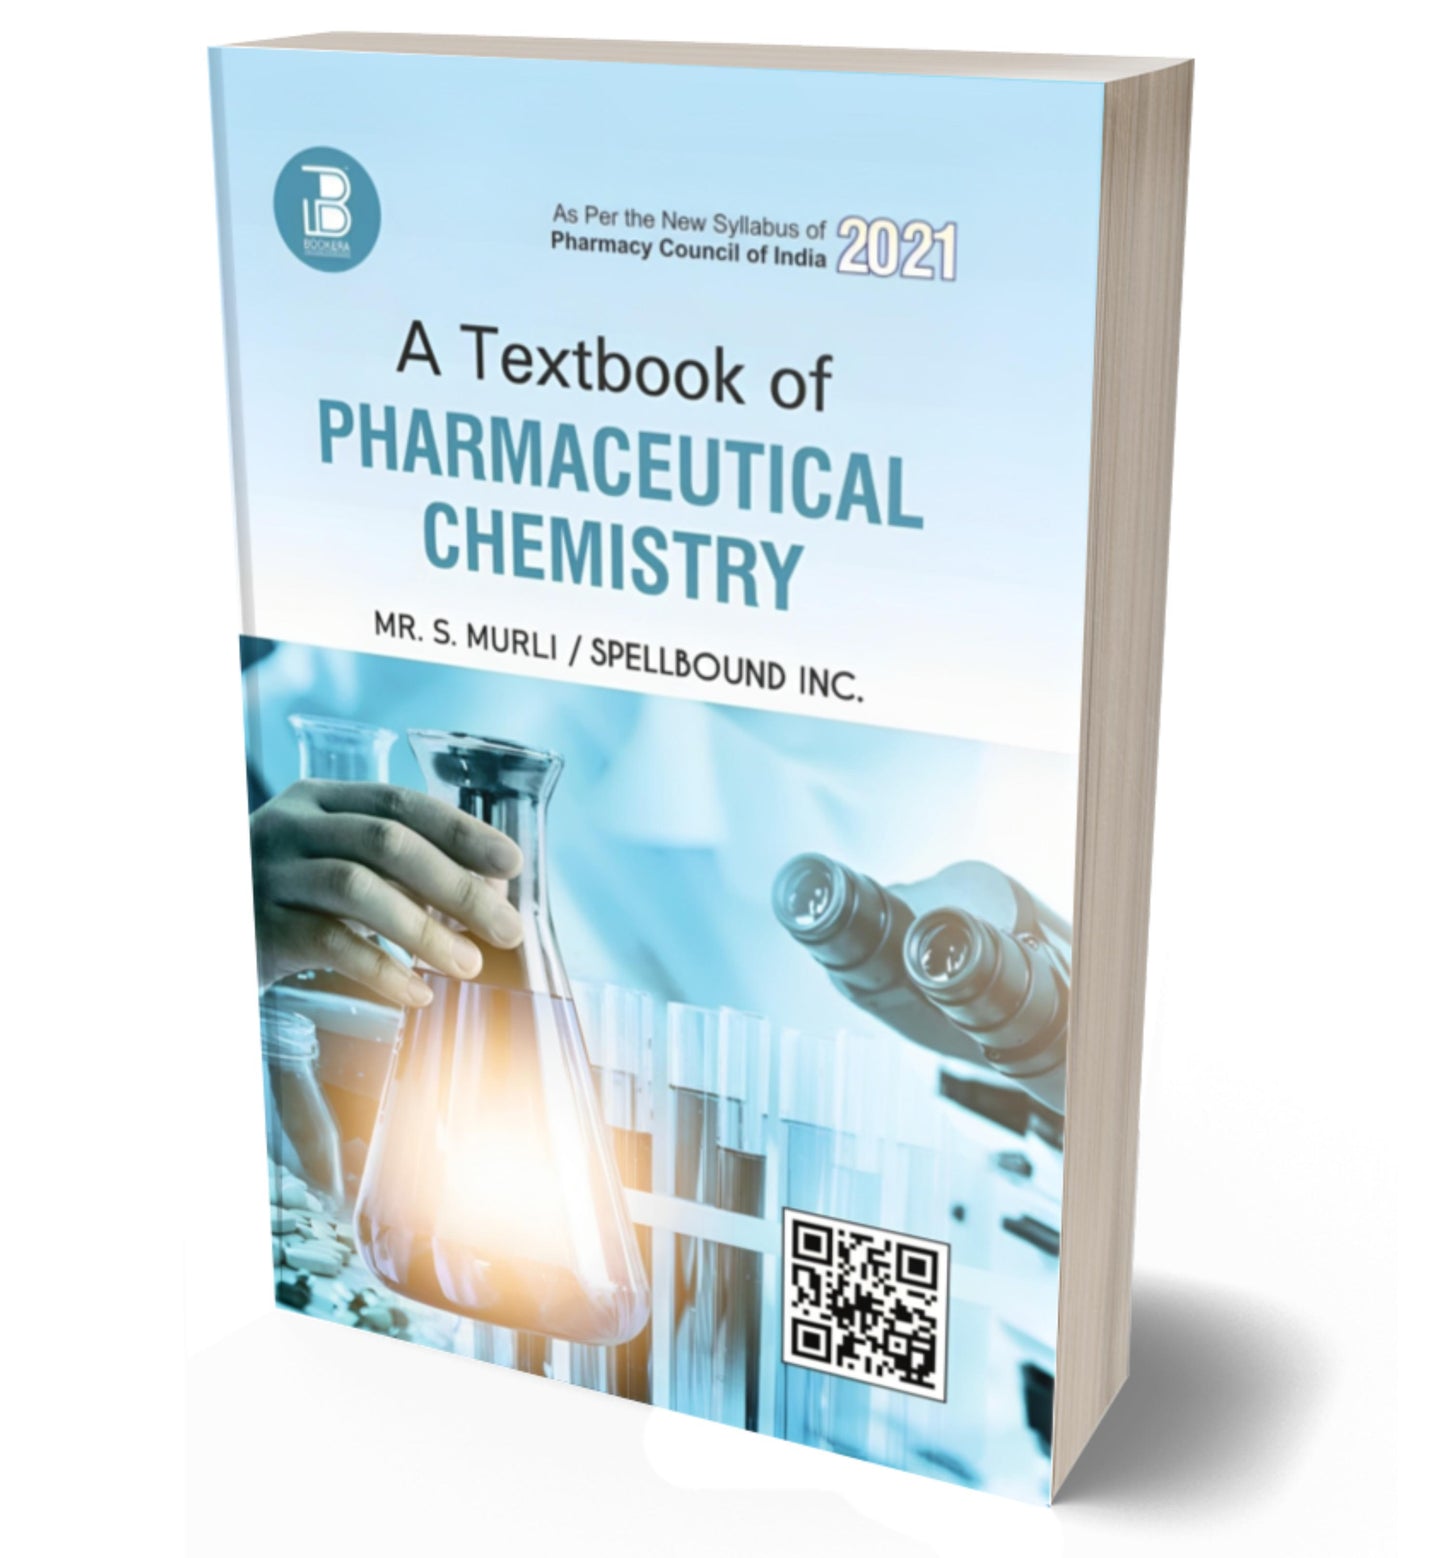 A Textbook of Pharmaceutical Chemistry